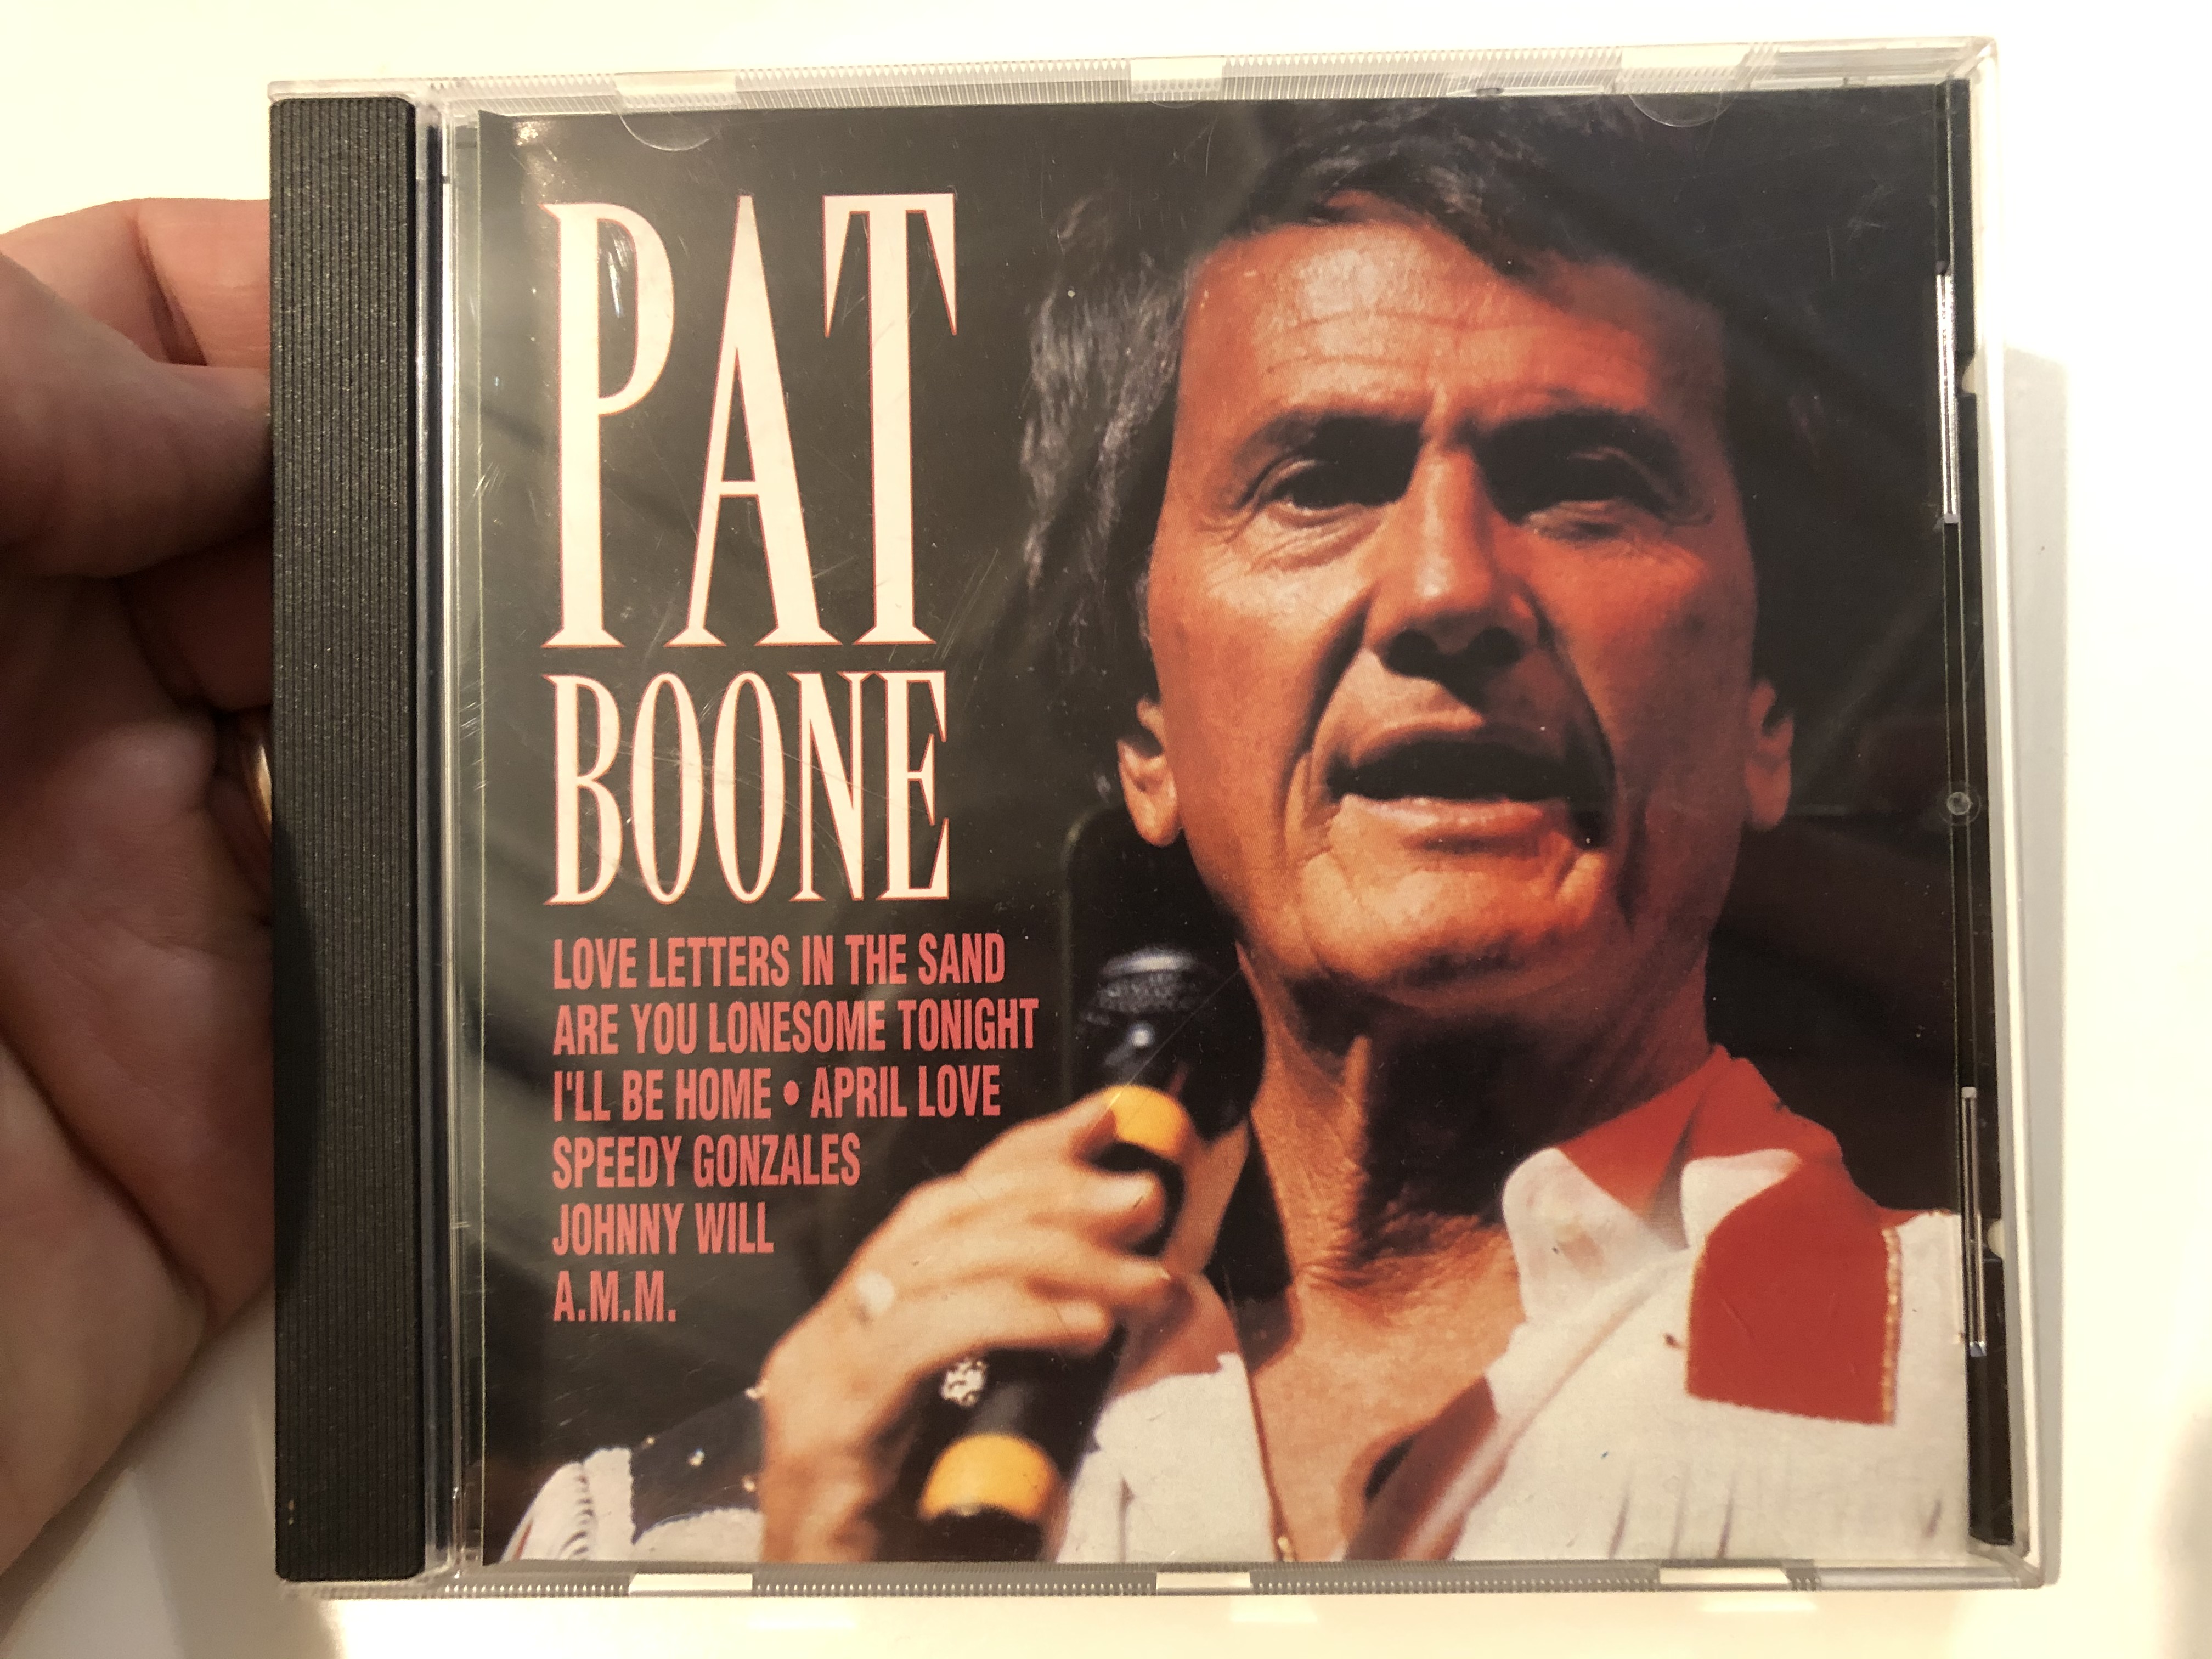 pat-boone-love-letters-in-the-sand-are-you-lonesome-tonight-i-ll-be-home-april-love-speedy-gonzales-johnny-will-a.m.m.-acd-audio-cd-stereo-cd-154-1-.jpg